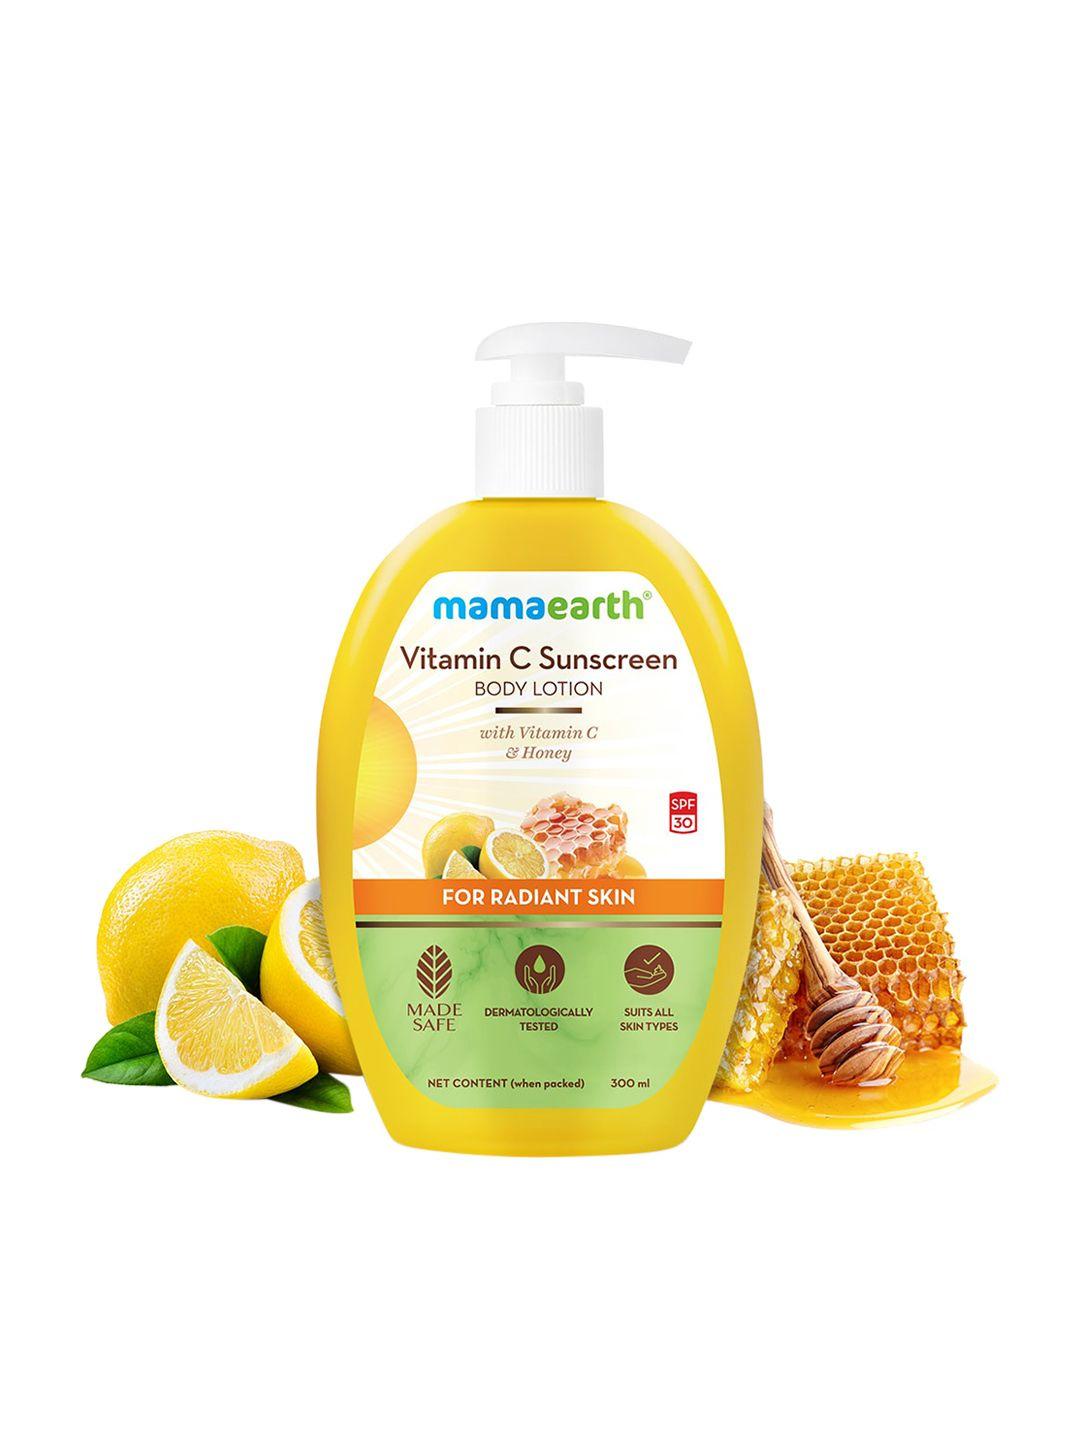 mamaearth vitamin c spf 30 sunscreen body lotion with honey & carrot seed - 300 ml